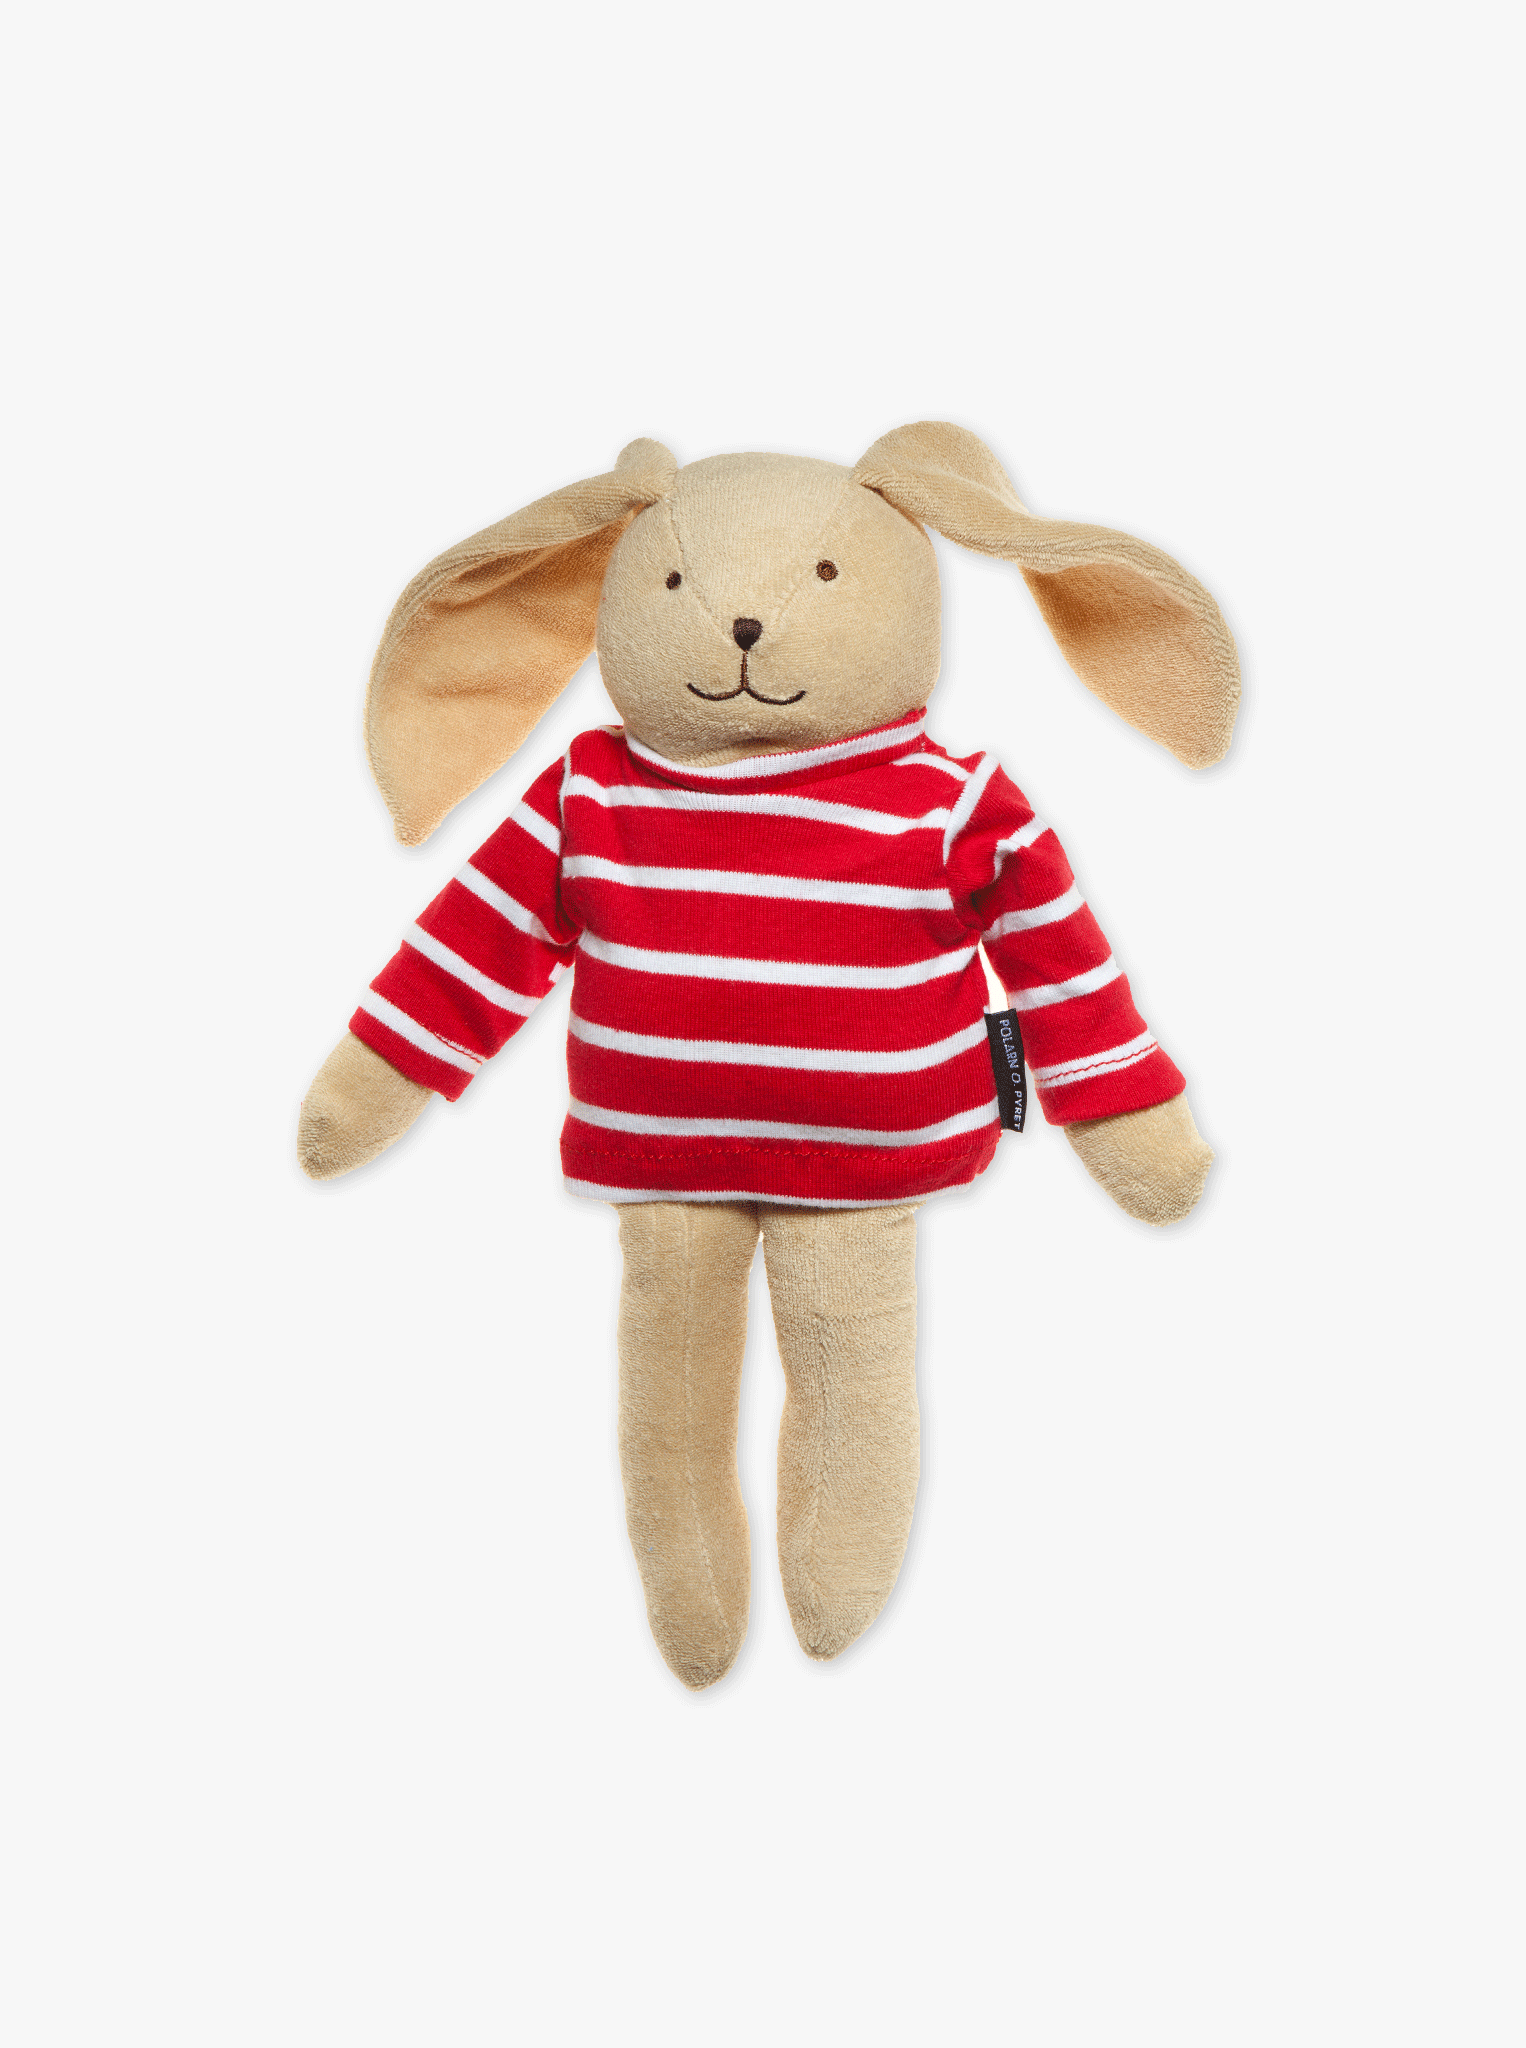 soft red and white striped PO.P bunny toy for kids 